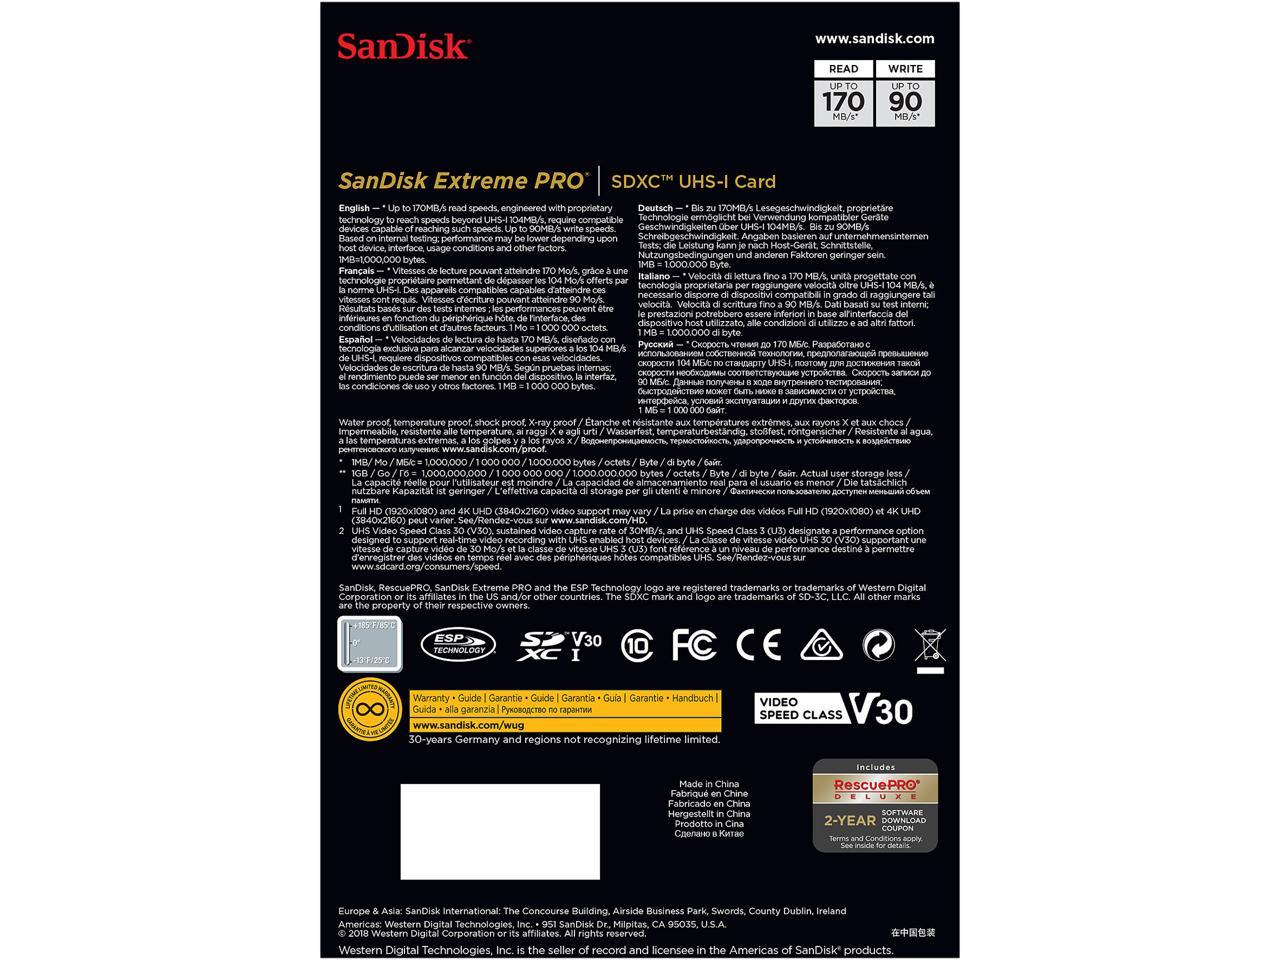 SanDisk Extreme Pro SDXC UHS-I/U3 Class 10 Memory Card Speed Up to 170MB/s 